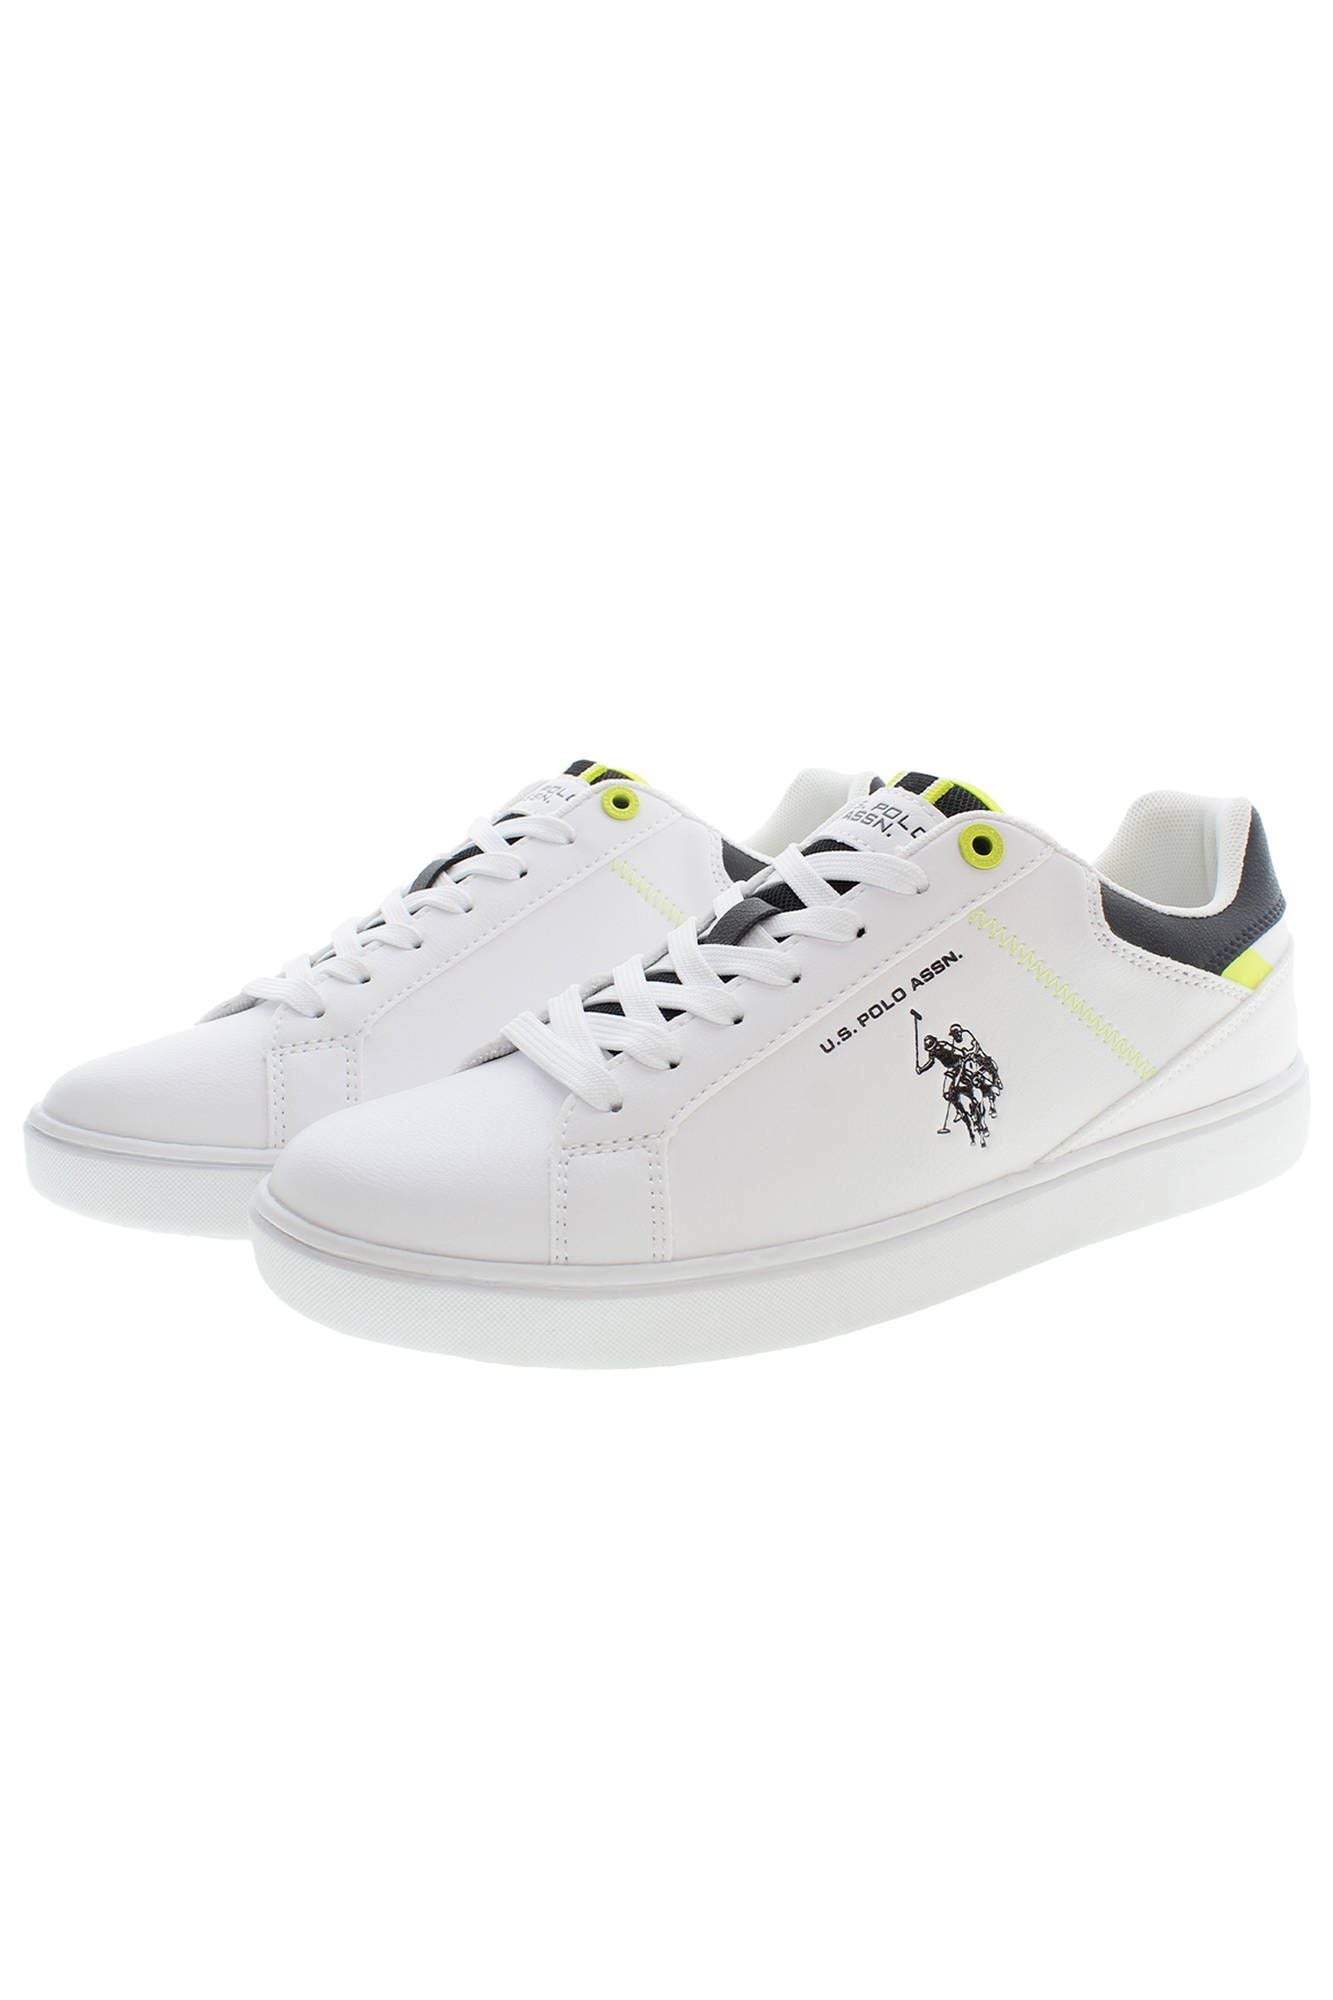 White Lace-Up Sneakers with Contrast Accents